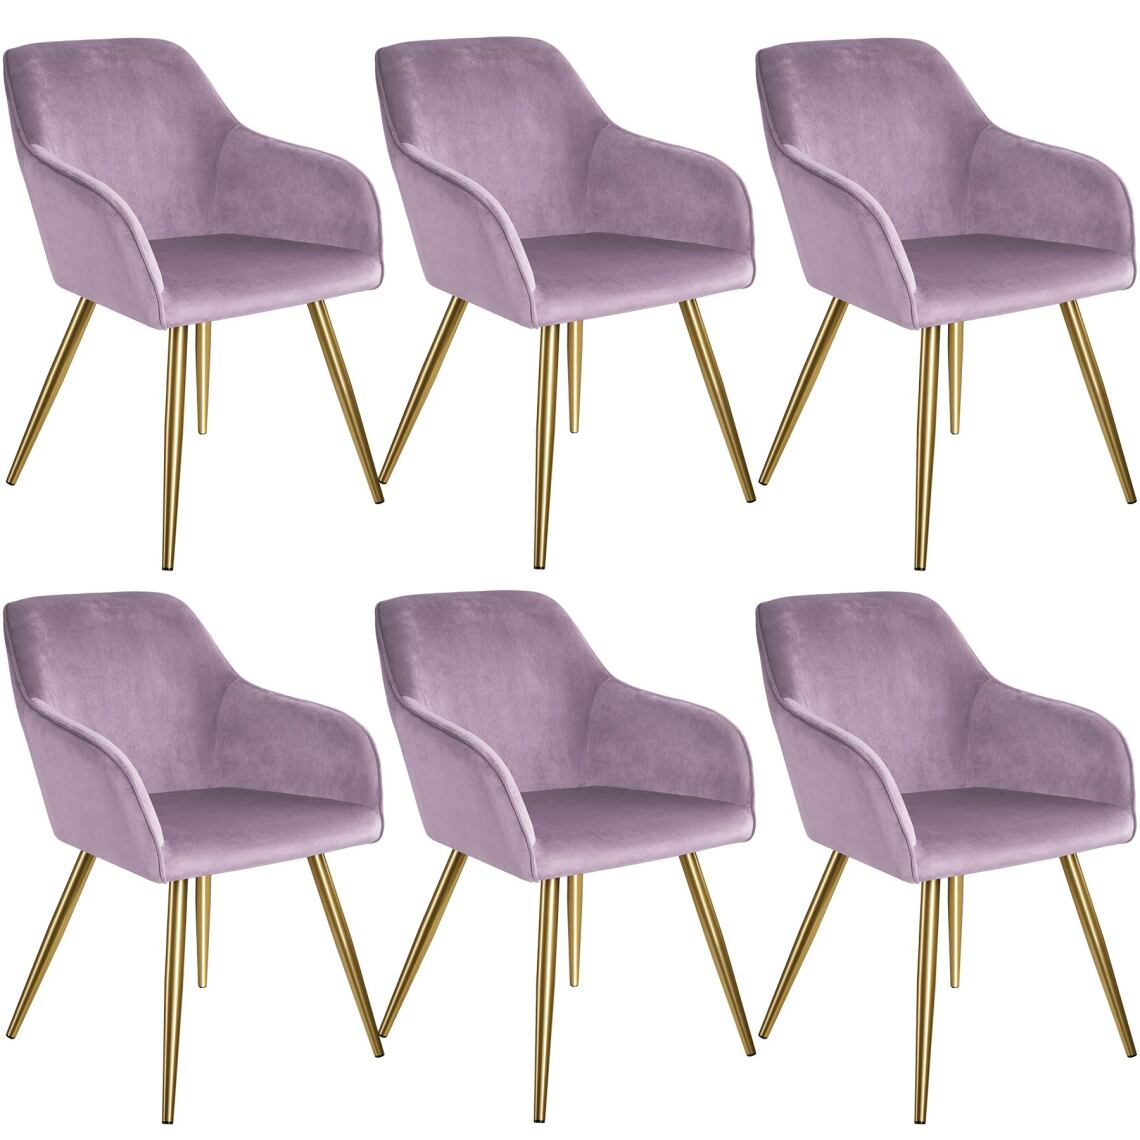 Tectake - 6 Chaises MARILYN Effet Velours Style Scandinave - violet clair/or - Chaises